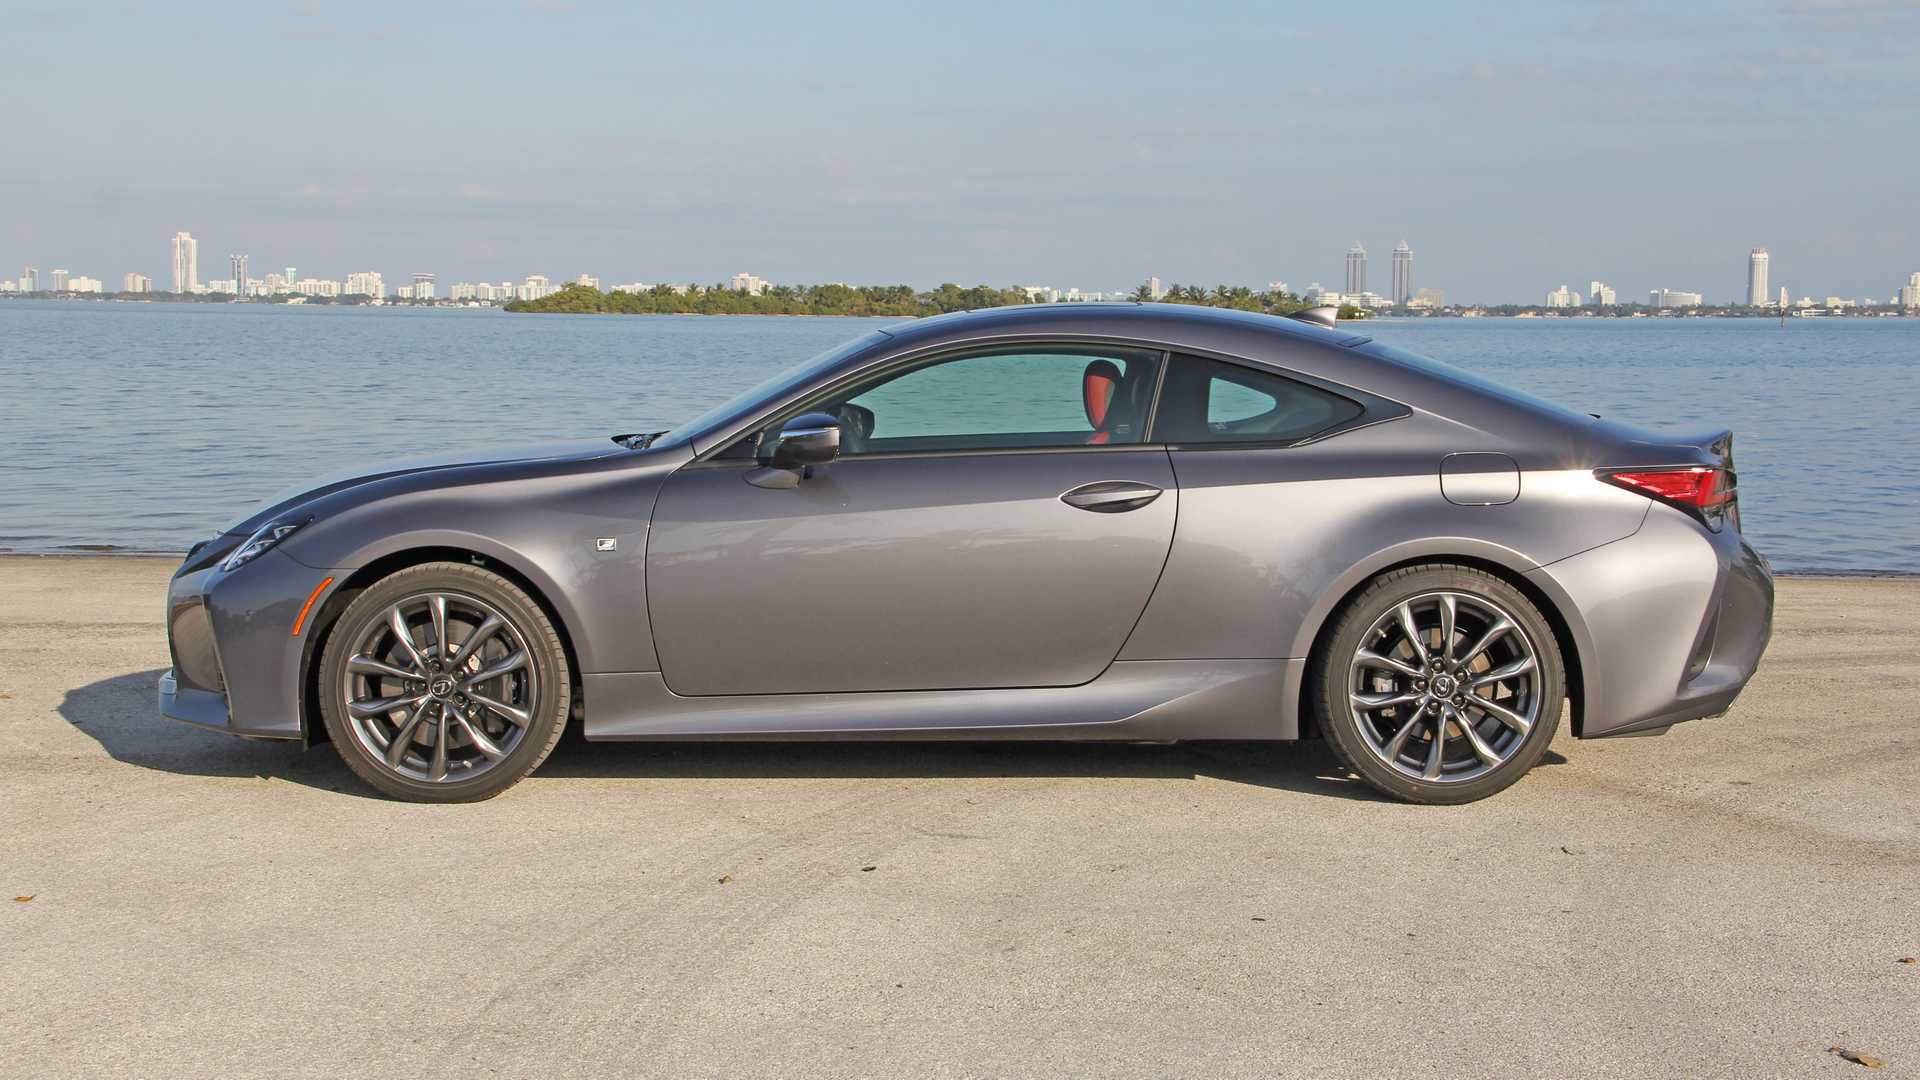 2019 Lexus RC First Drive: New Face, Who Dis?